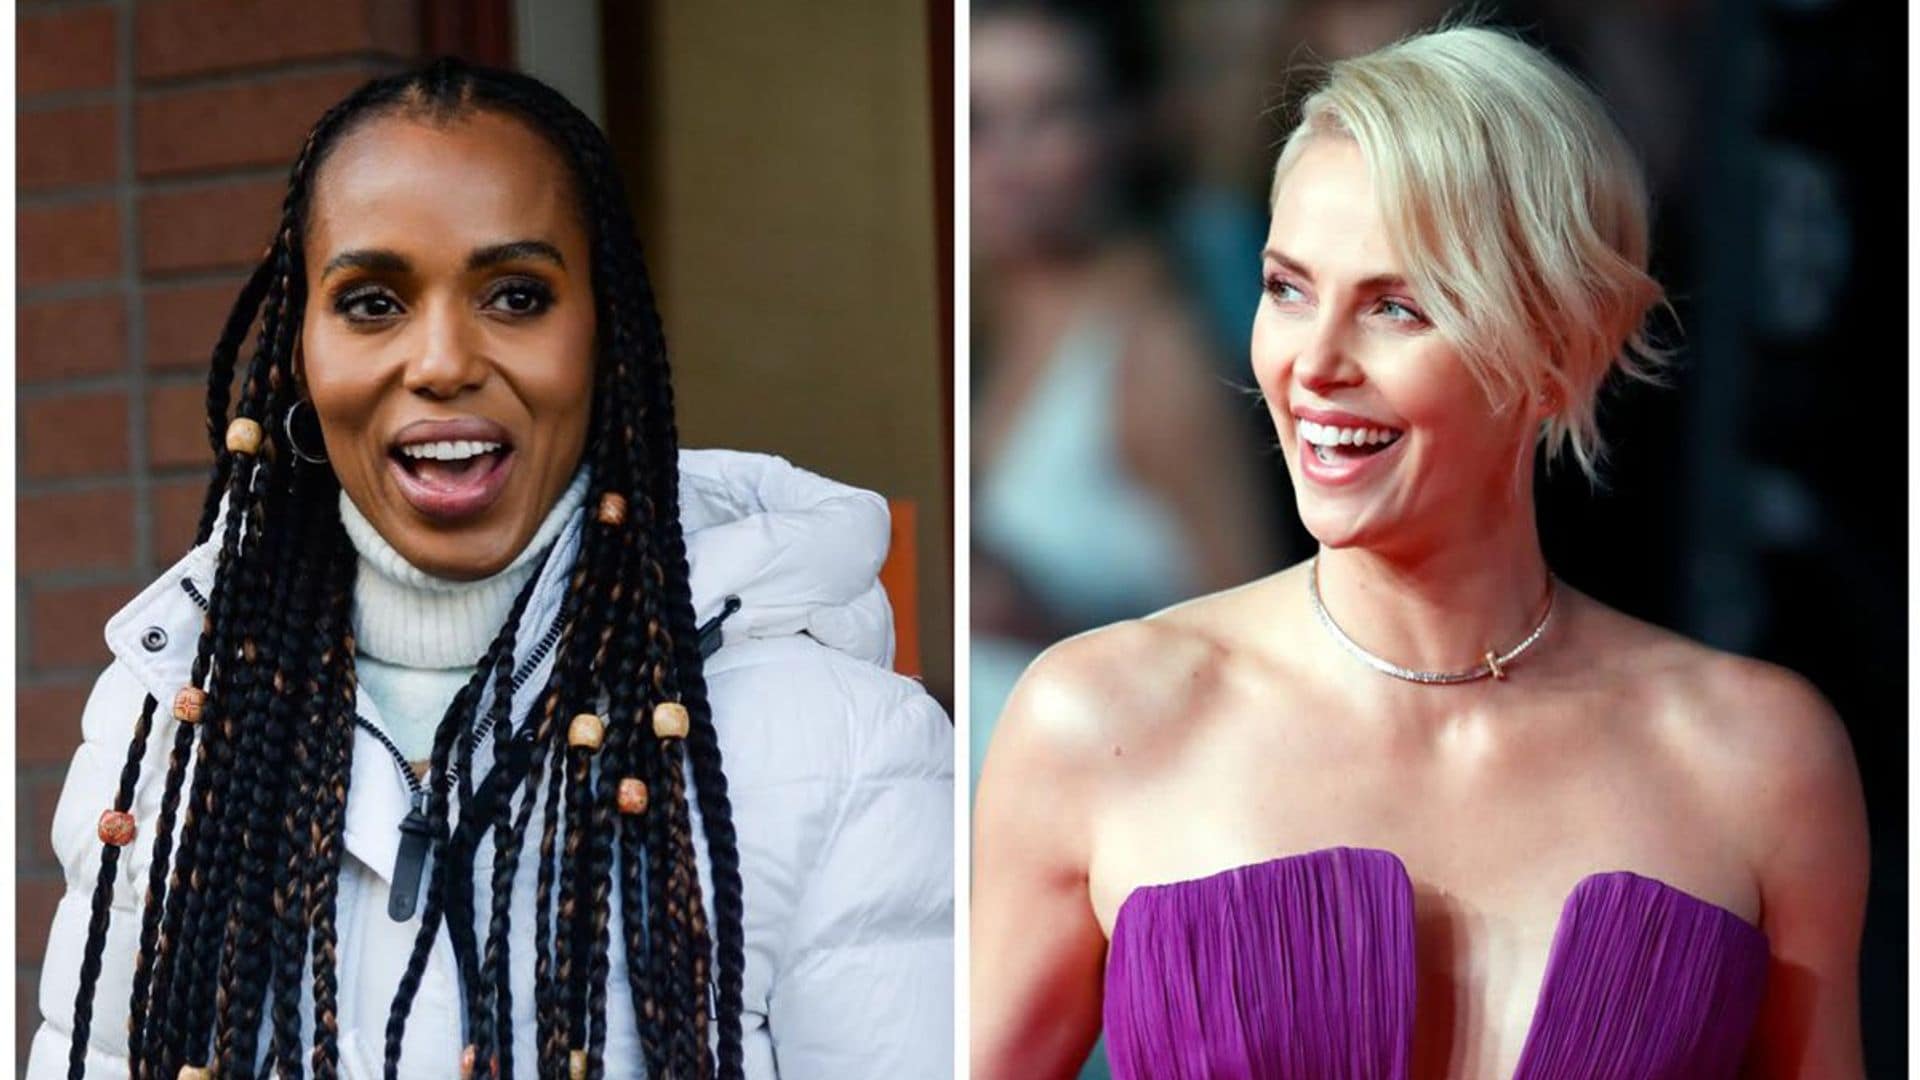 Charlize Theron and Kerry Washington co-star in Netflix’s upcoming fantasy film